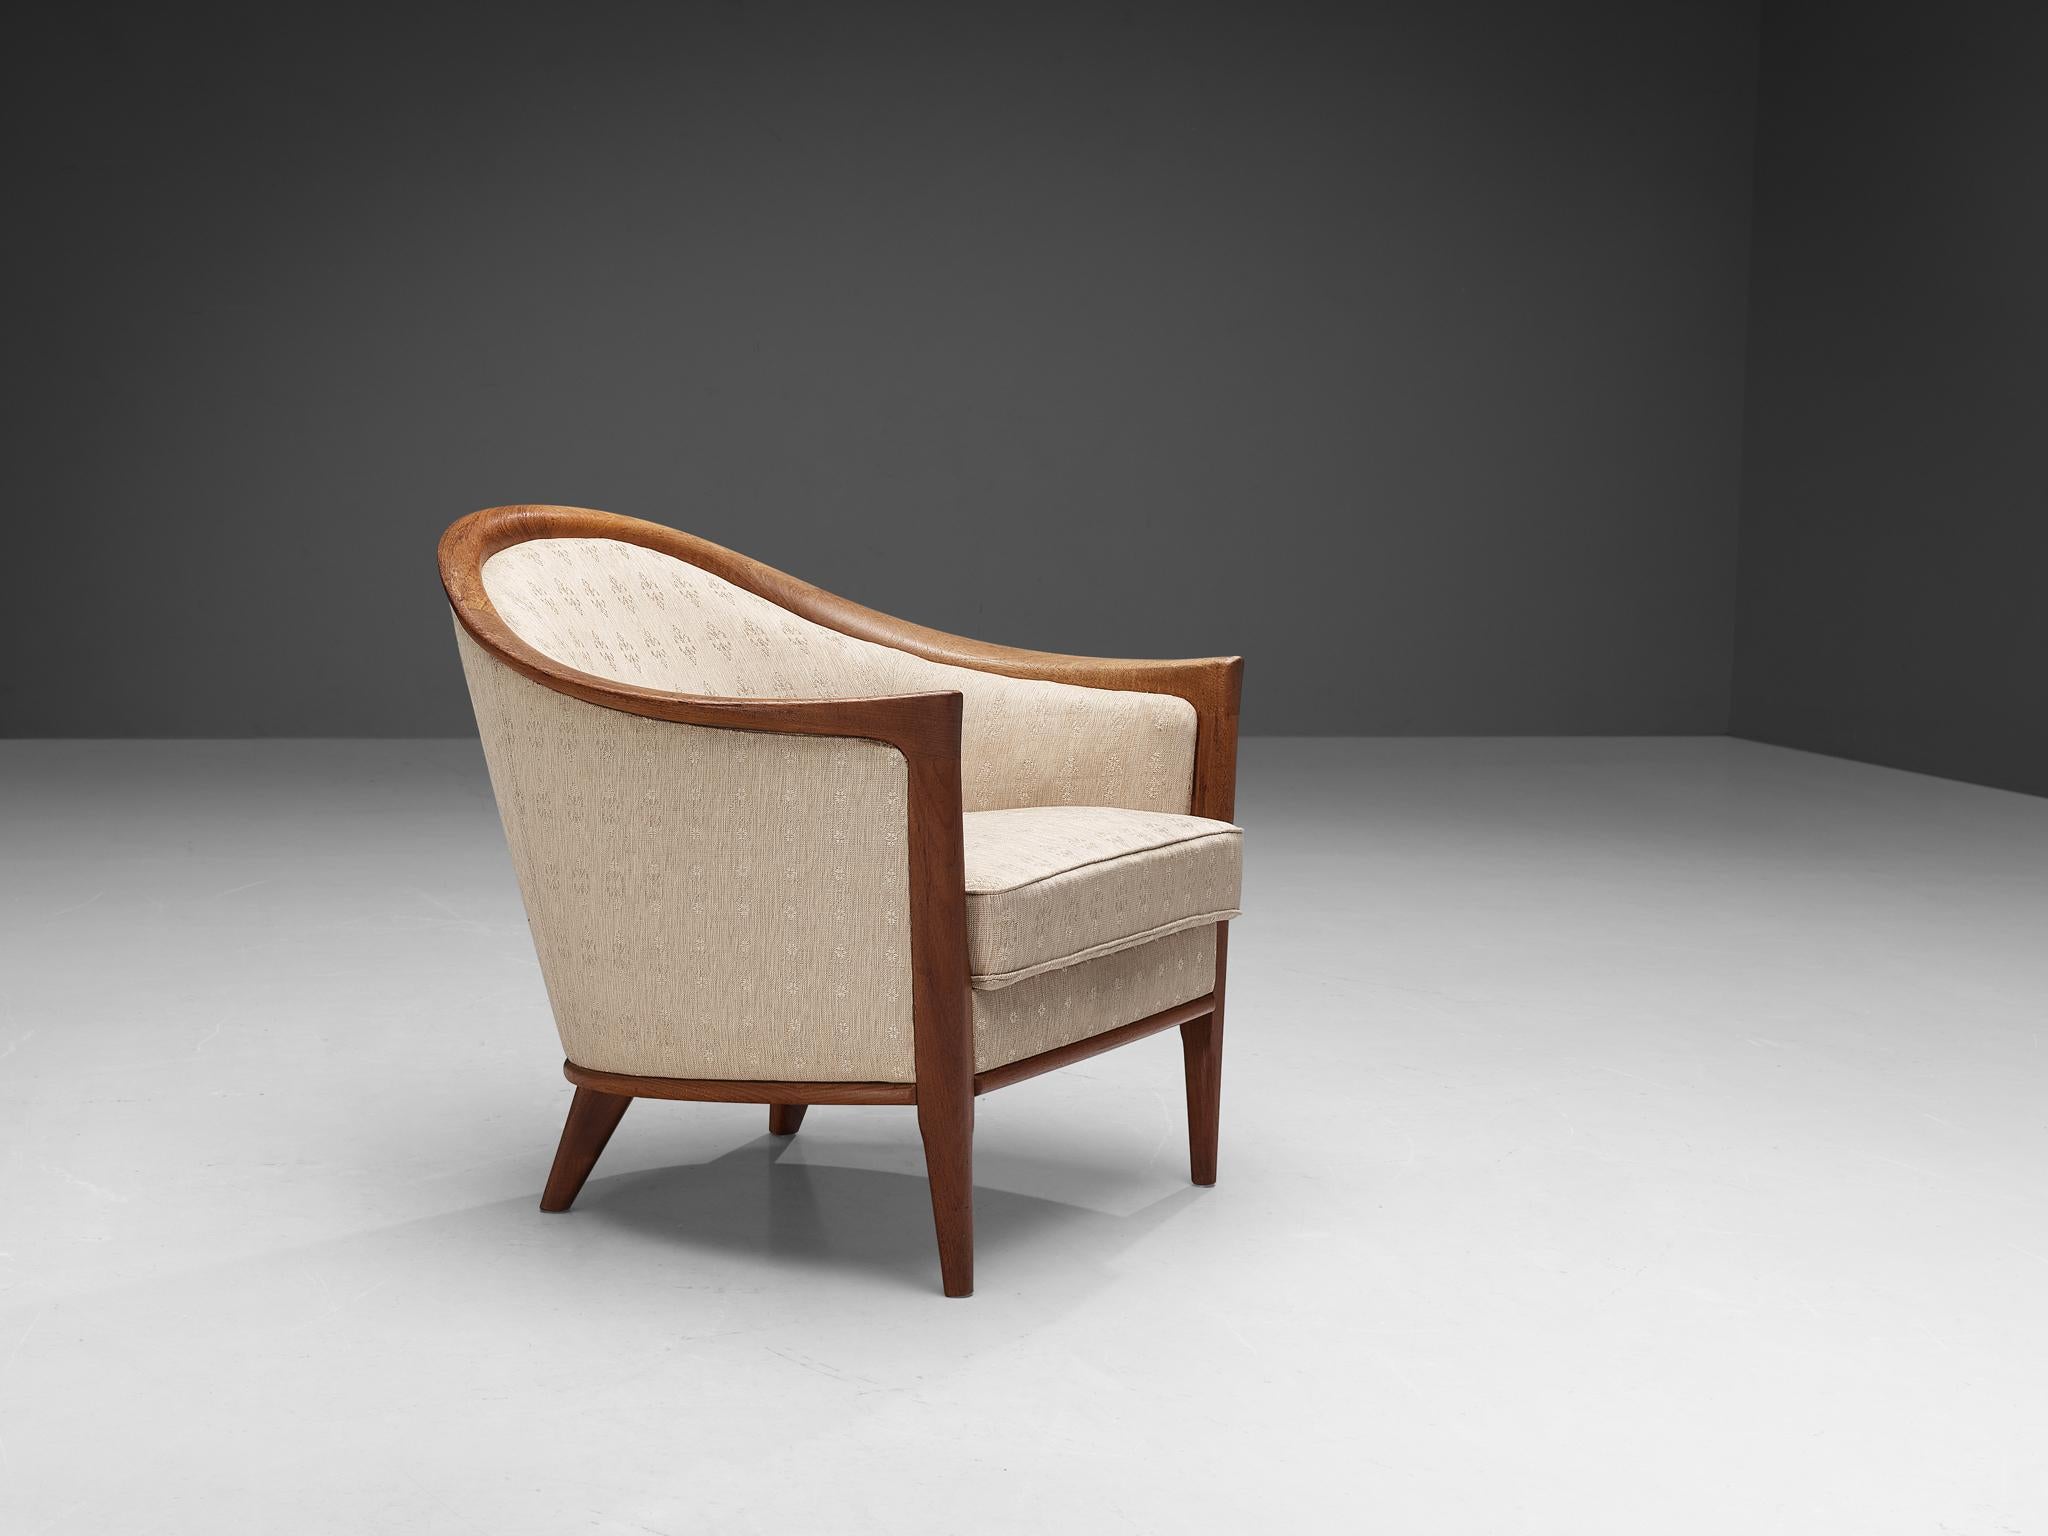 Armchair, teak and fabric, Sweden, 1950s.

This easy chair features its original beige upholstery. The unique lines and curves of the design are striking and the tapered wooden legs complement its shape beautifully. Highly comfortable and